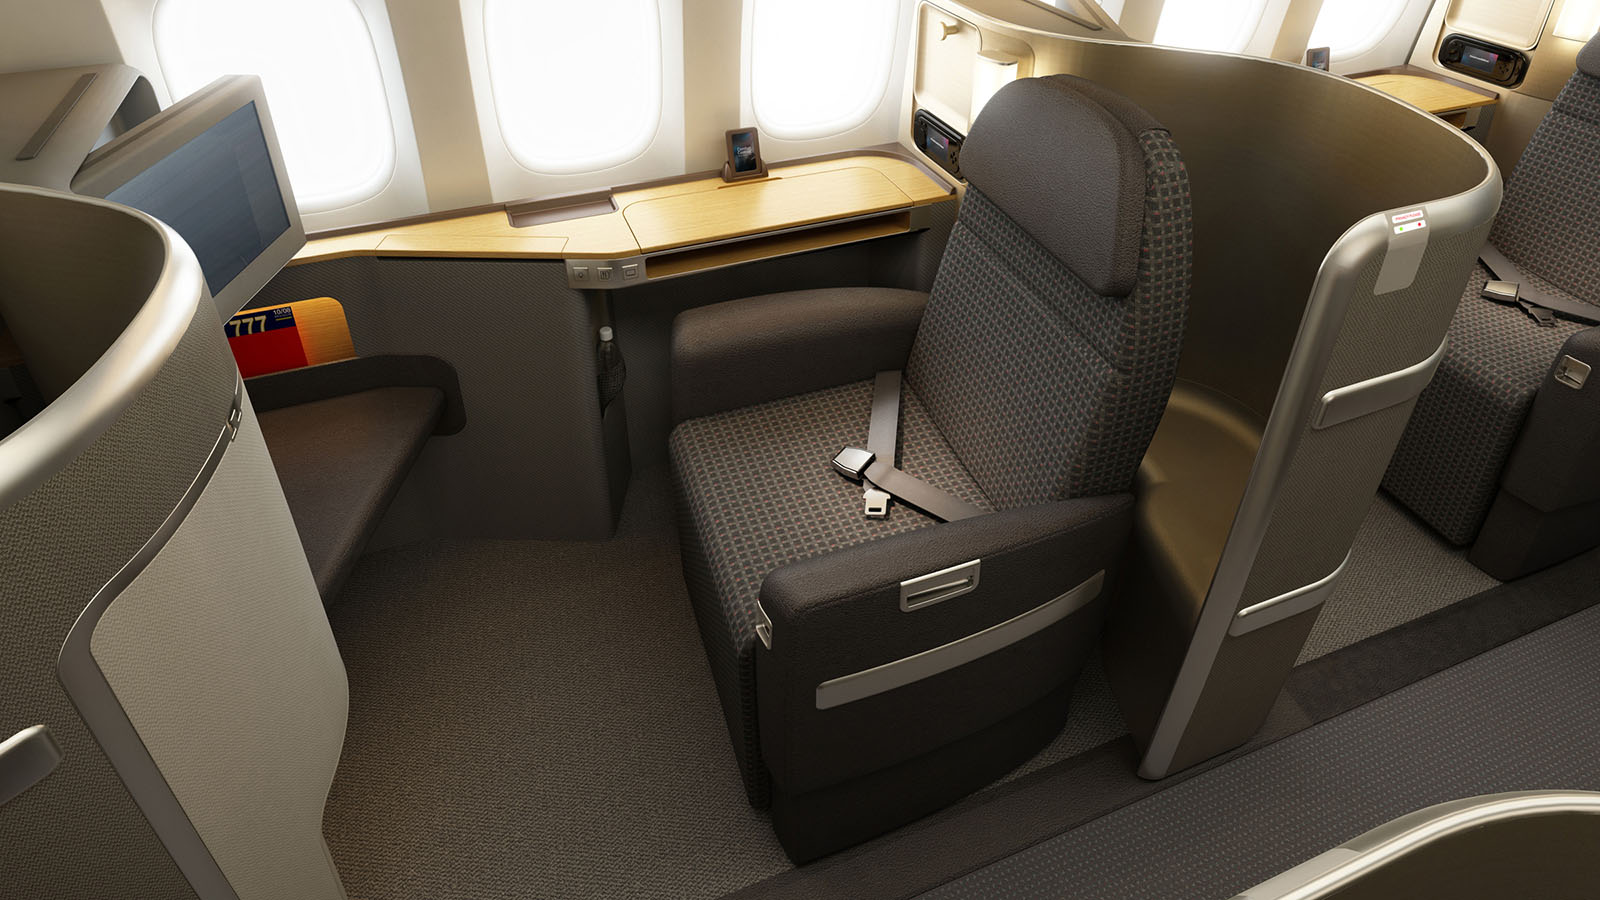 Seat in American Airlines Flagship First